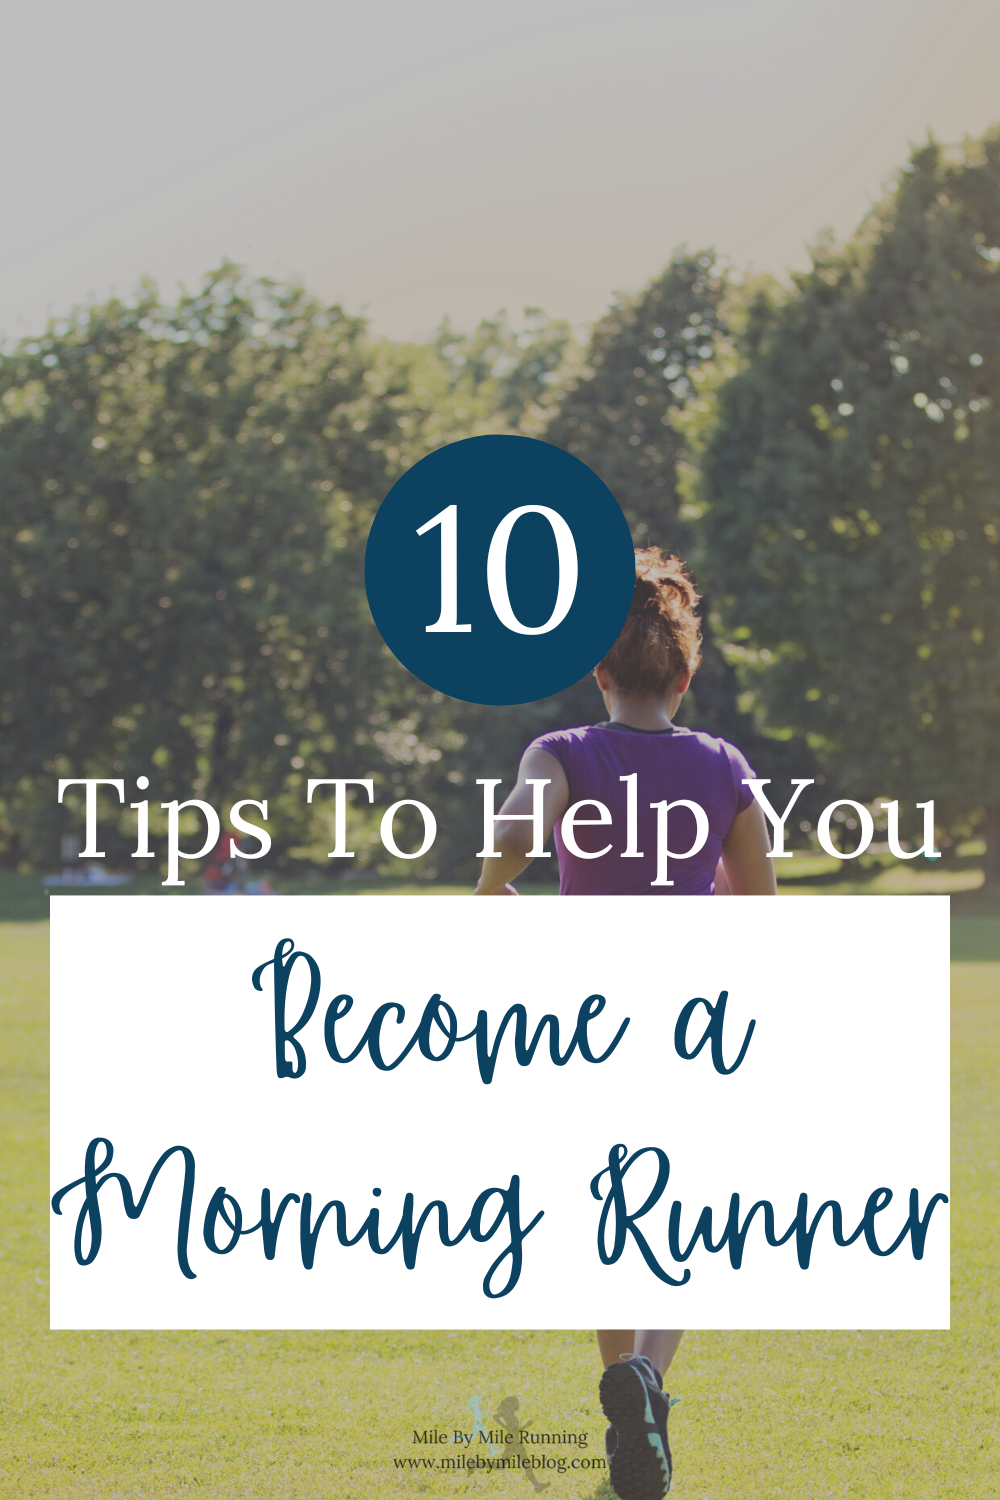 Have you wanted to become a morning runner? It can take some work to start running in the morning. If you are looking to become a morning runner, here are some tips to get you started and keep you running in the morning consistently.